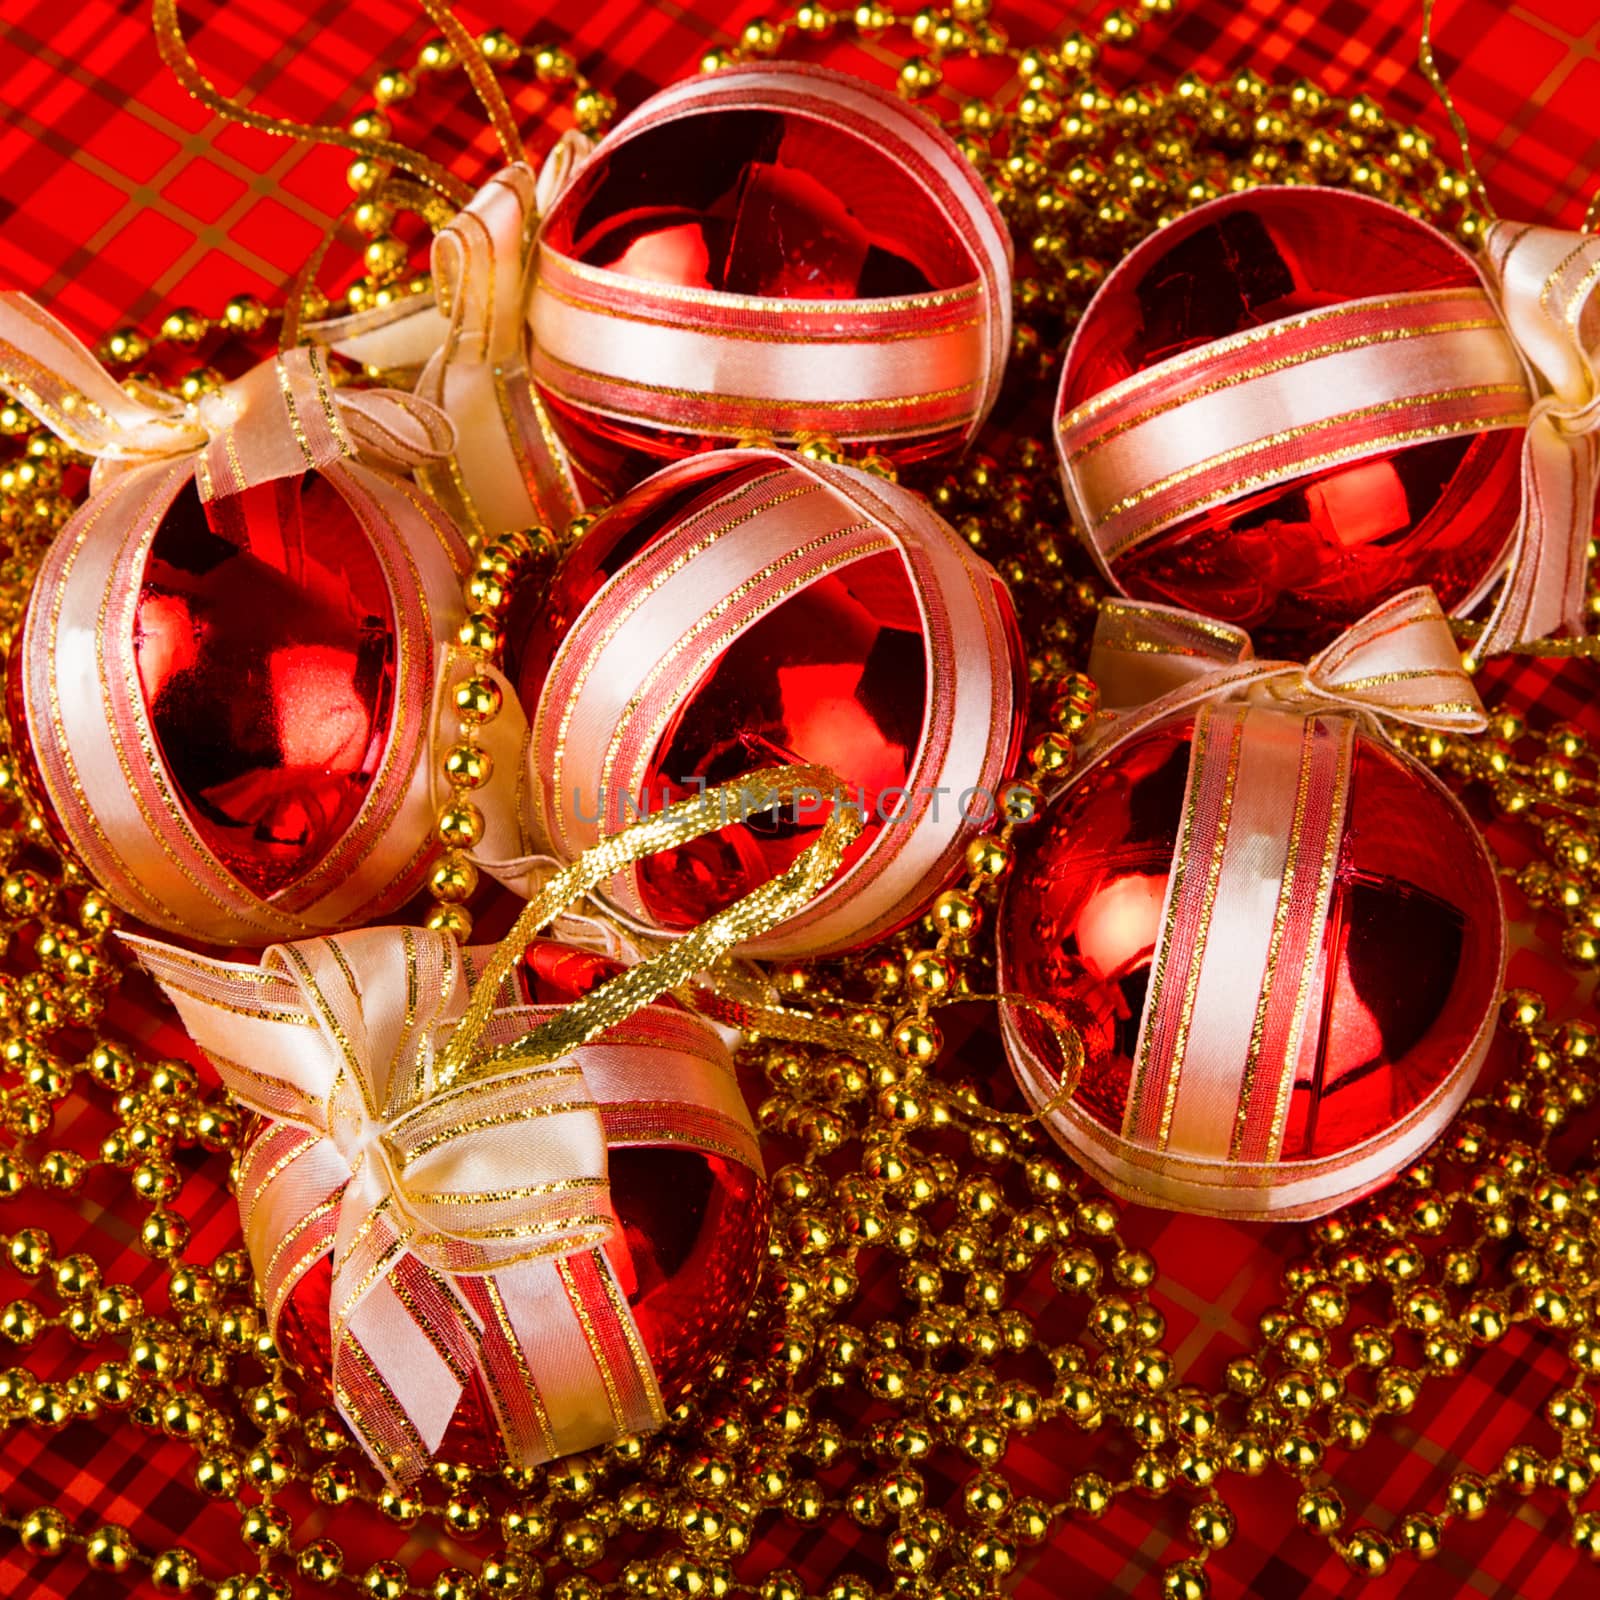 Red Christmas balls on a red background